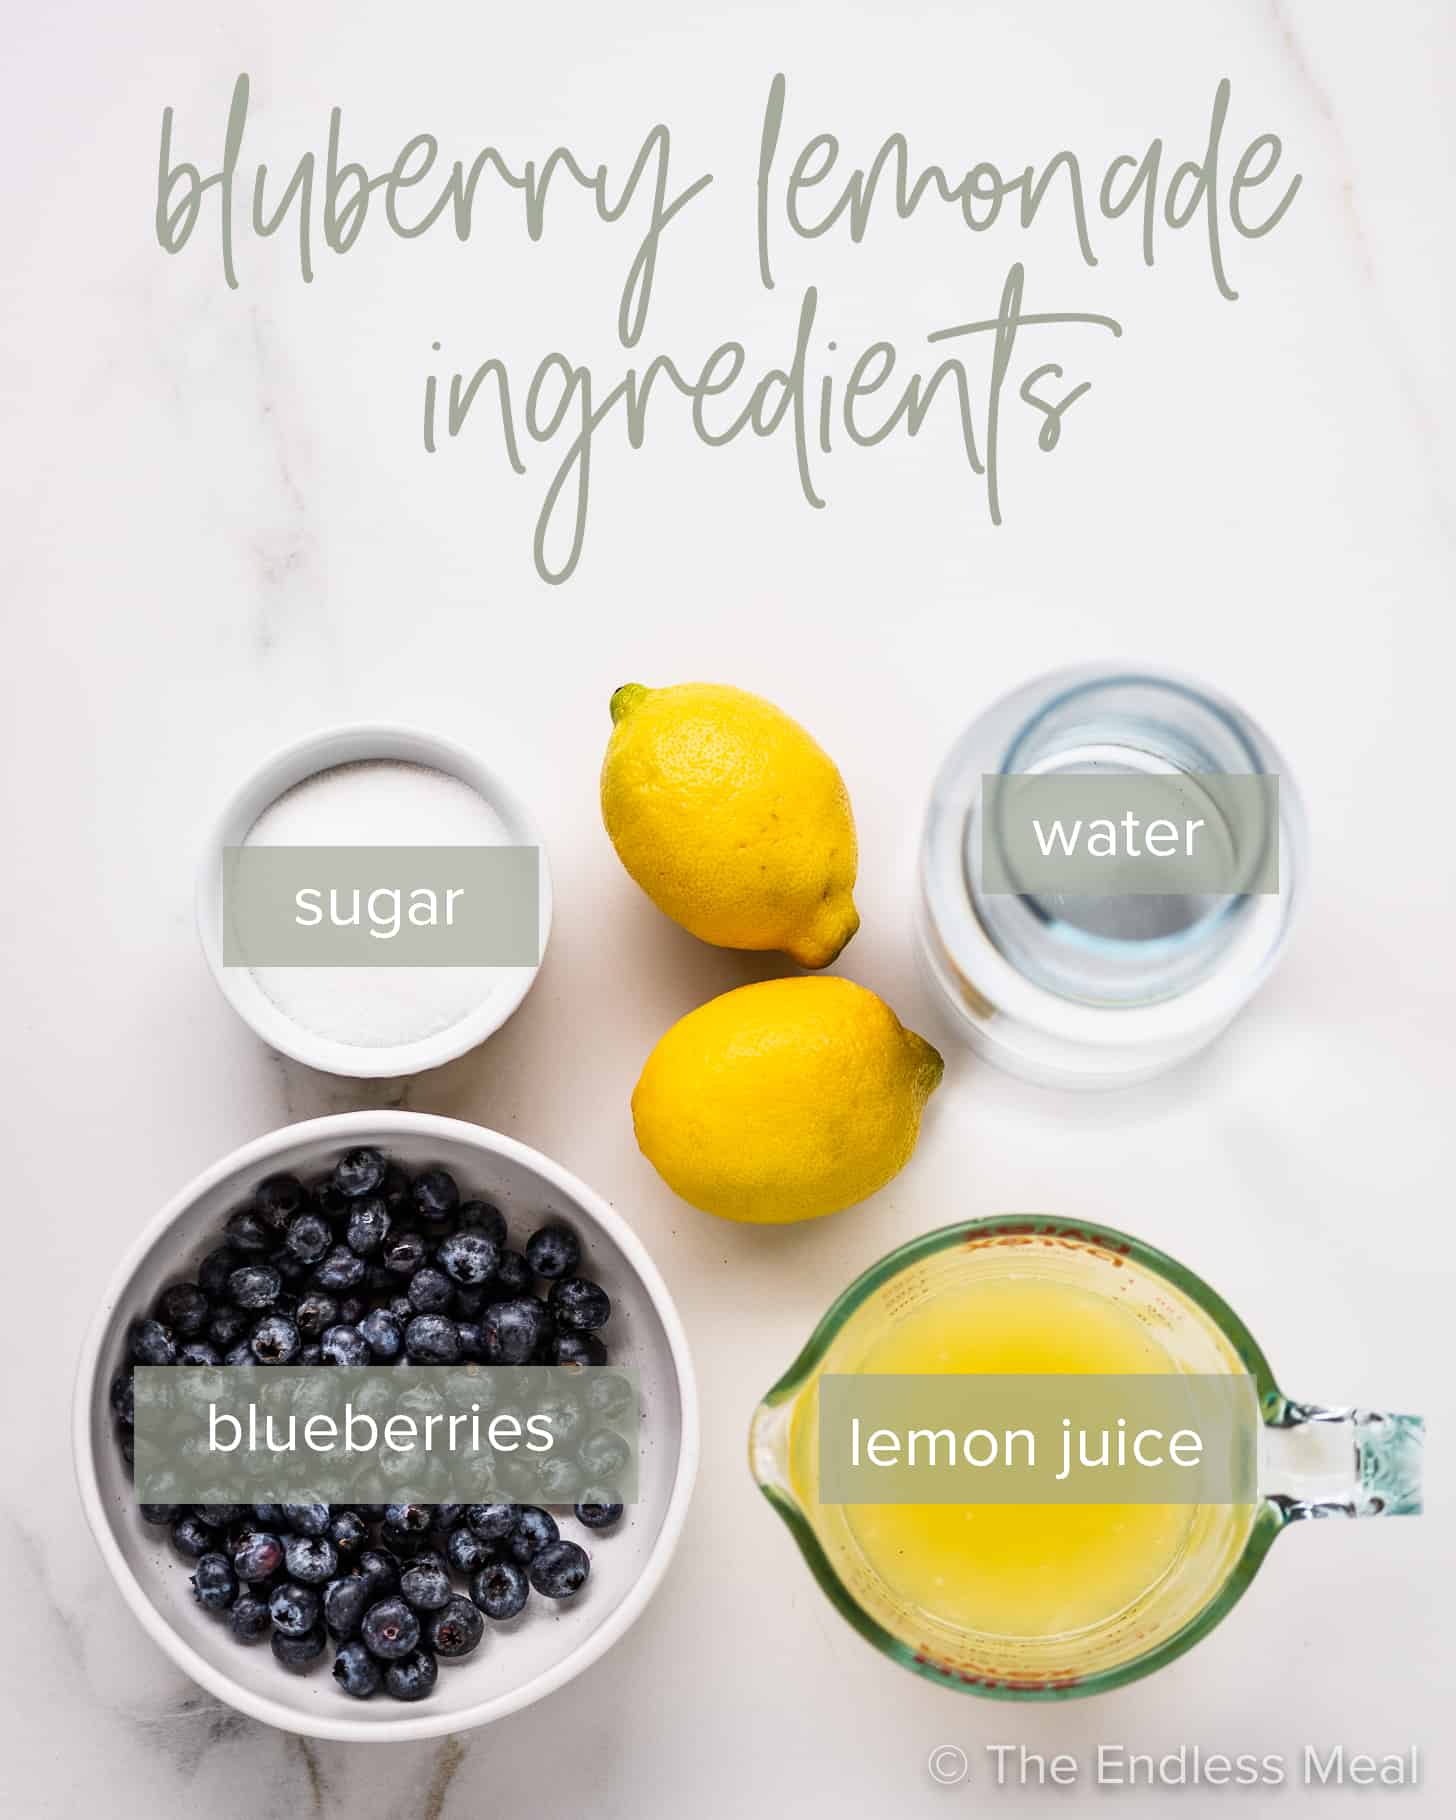 the ingredients needed to make a blueberry lemonade